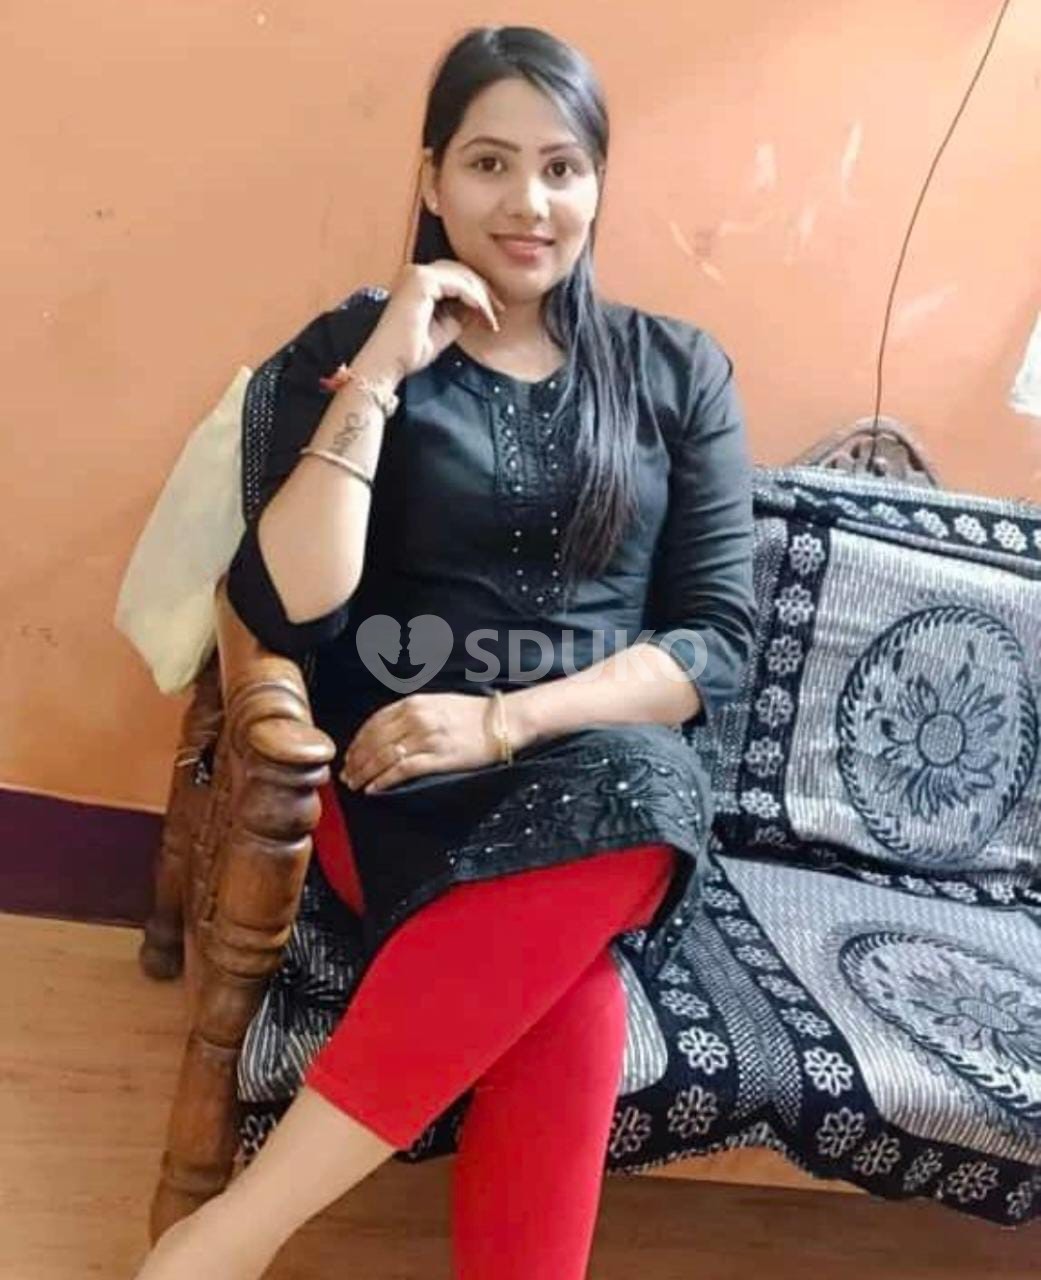 👉CALL NOW SIMRAN 82-640-48-146👌PREET CHANDIGARH NO ADVANCE ONLY CASH PAIYMENT INDEPENDENT